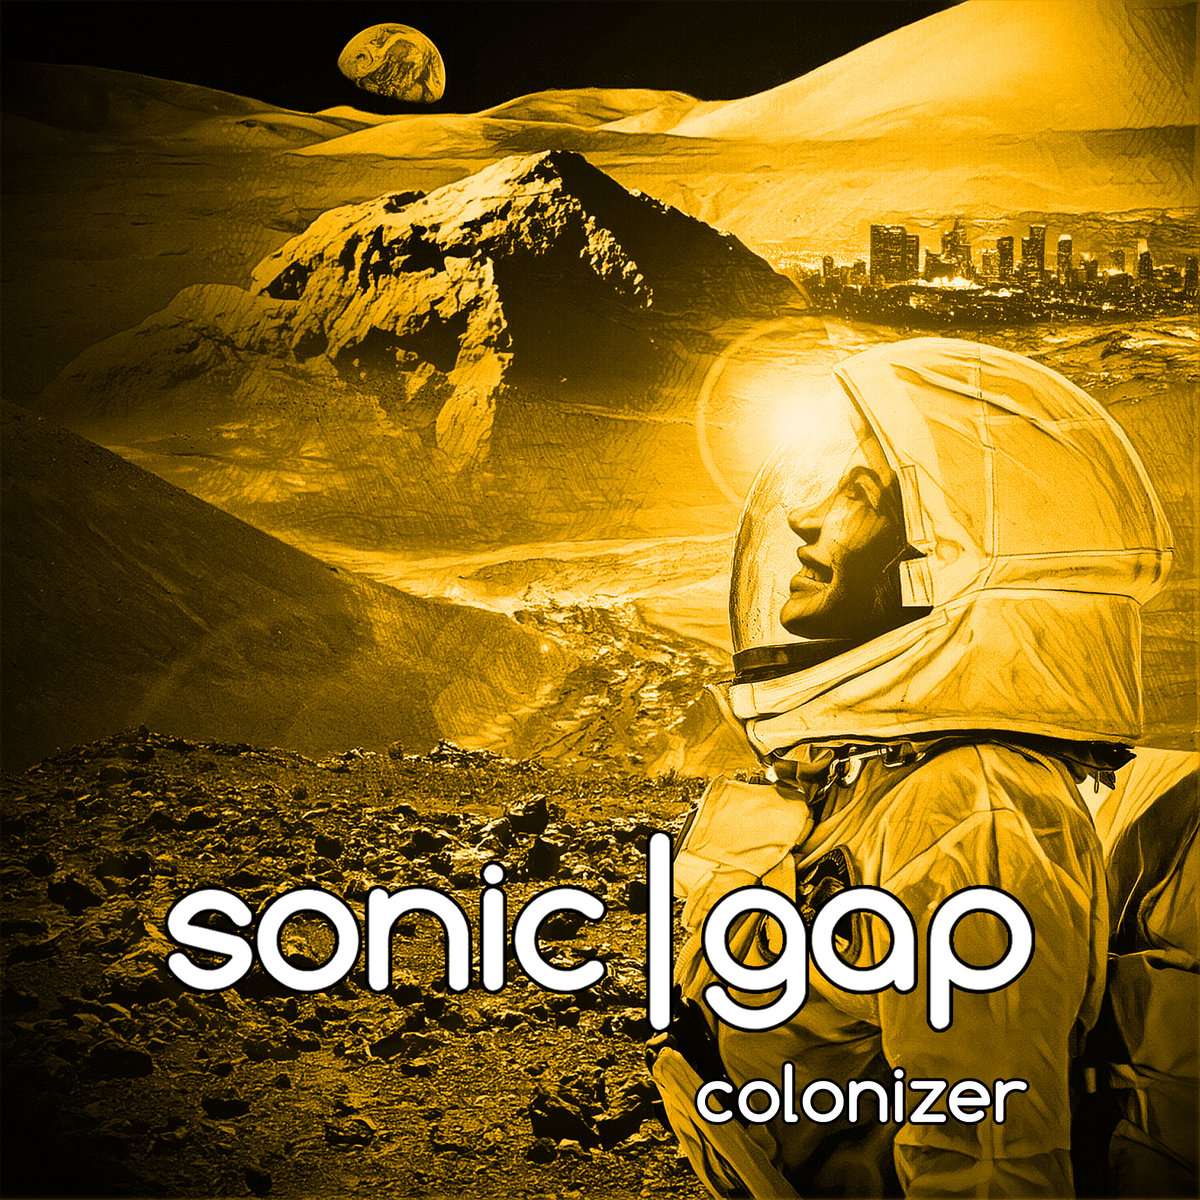 Album Review: "Colonizer" by Sonic Gap